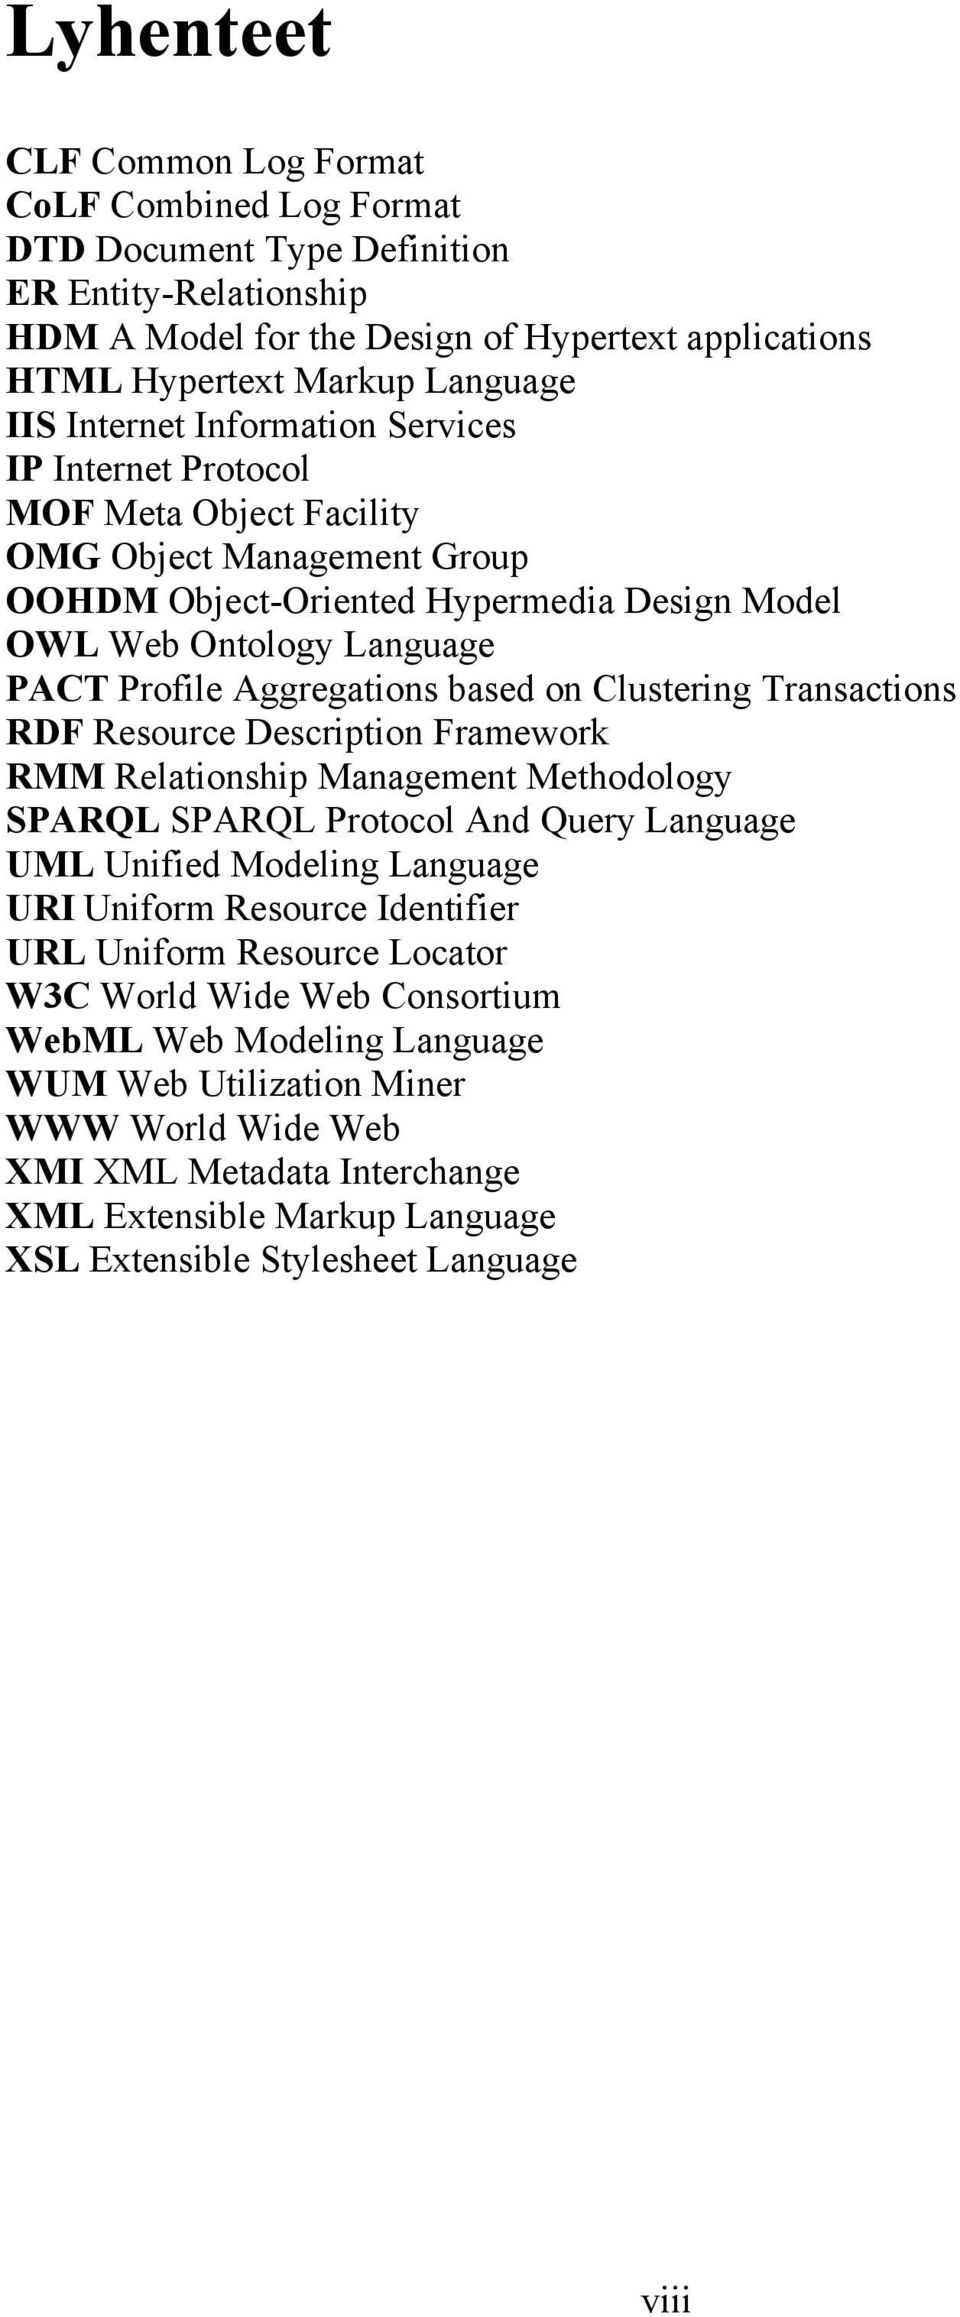 Aggregations based on Clustering Transactions RDF Resource Description Framework RMM Relationship Management Methodology SPARQL SPARQL Protocol And Query Language UML Unified Modeling Language URI